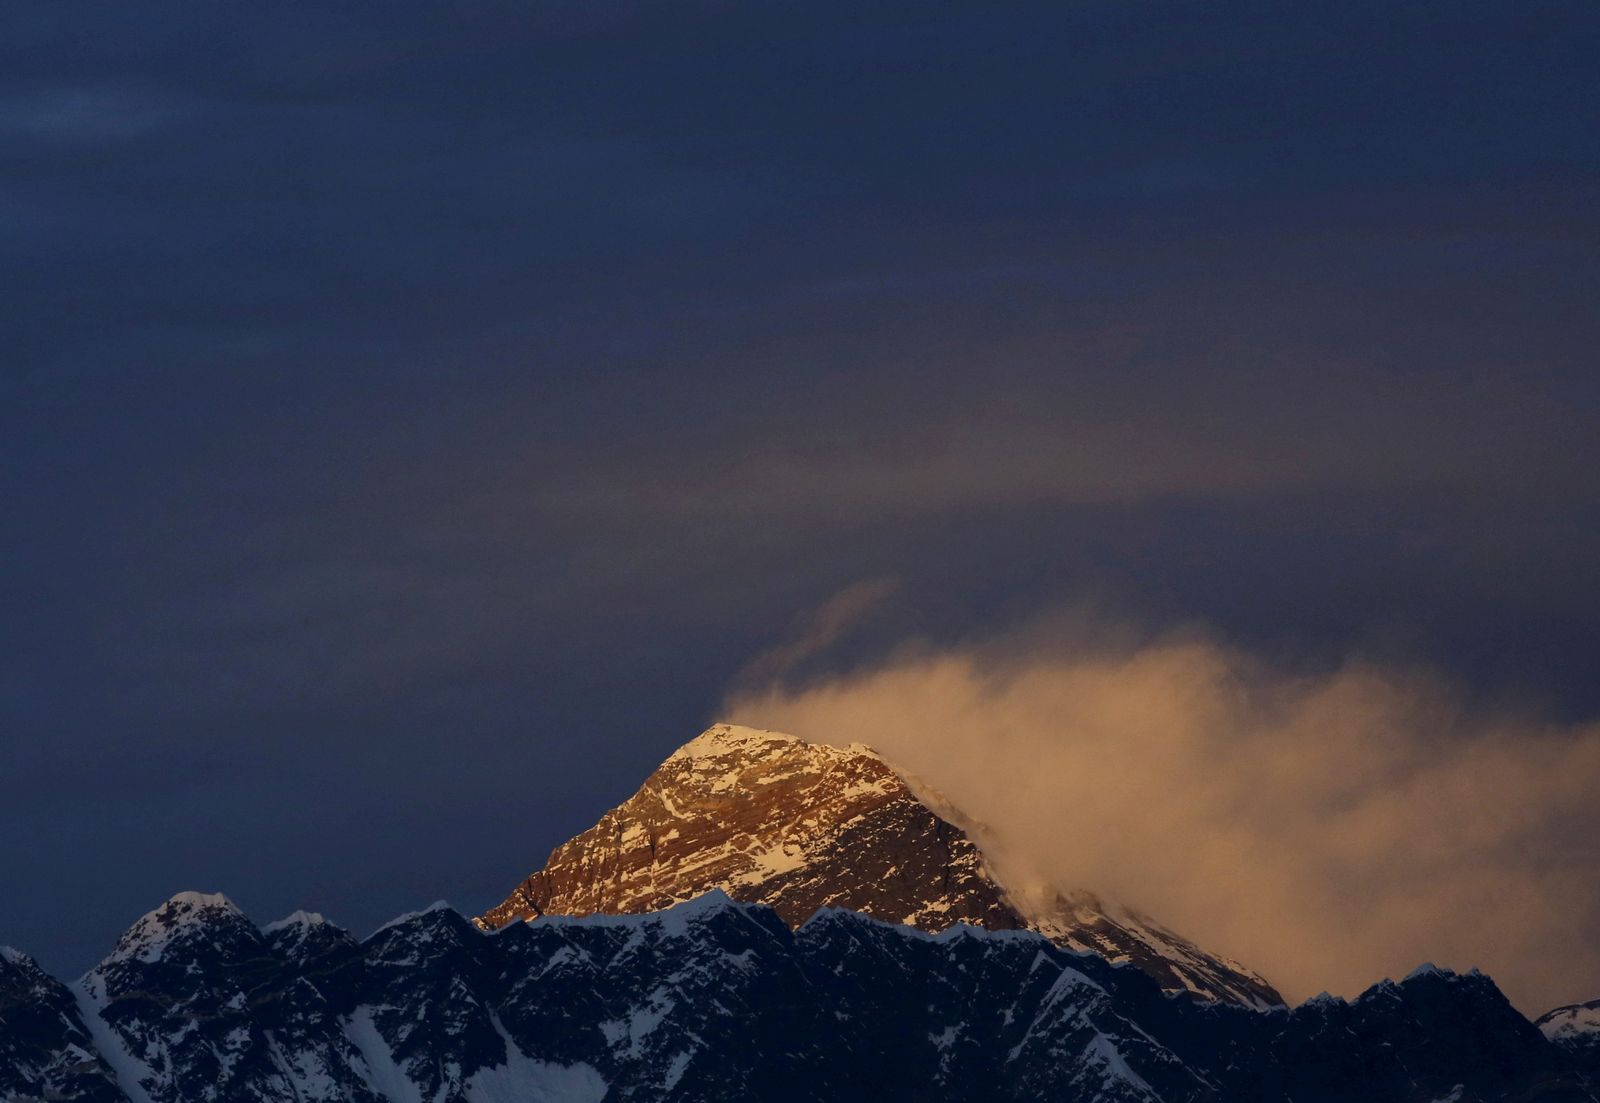 FILE PHOTO: Light illuminates Mount Everest, during sunset in Solukhumbu District also known as the Everest region - REUTERS